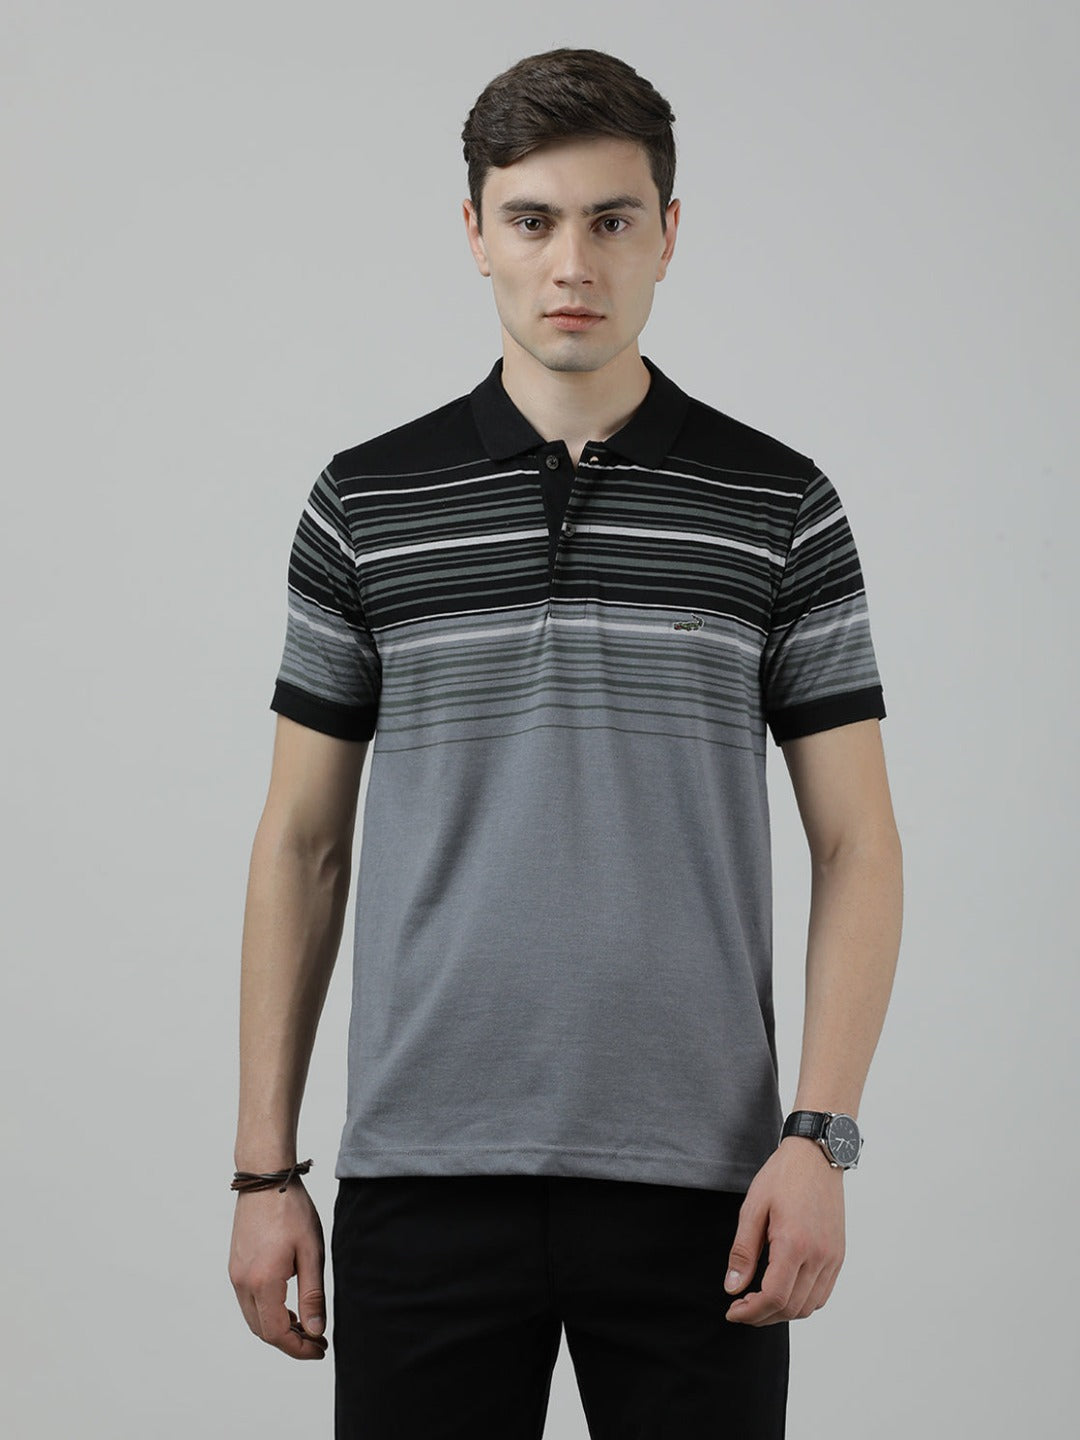 Casual Black T-Shirt Half Sleeve Slim Fit Jersey Engineering Stripe with Collar for Men